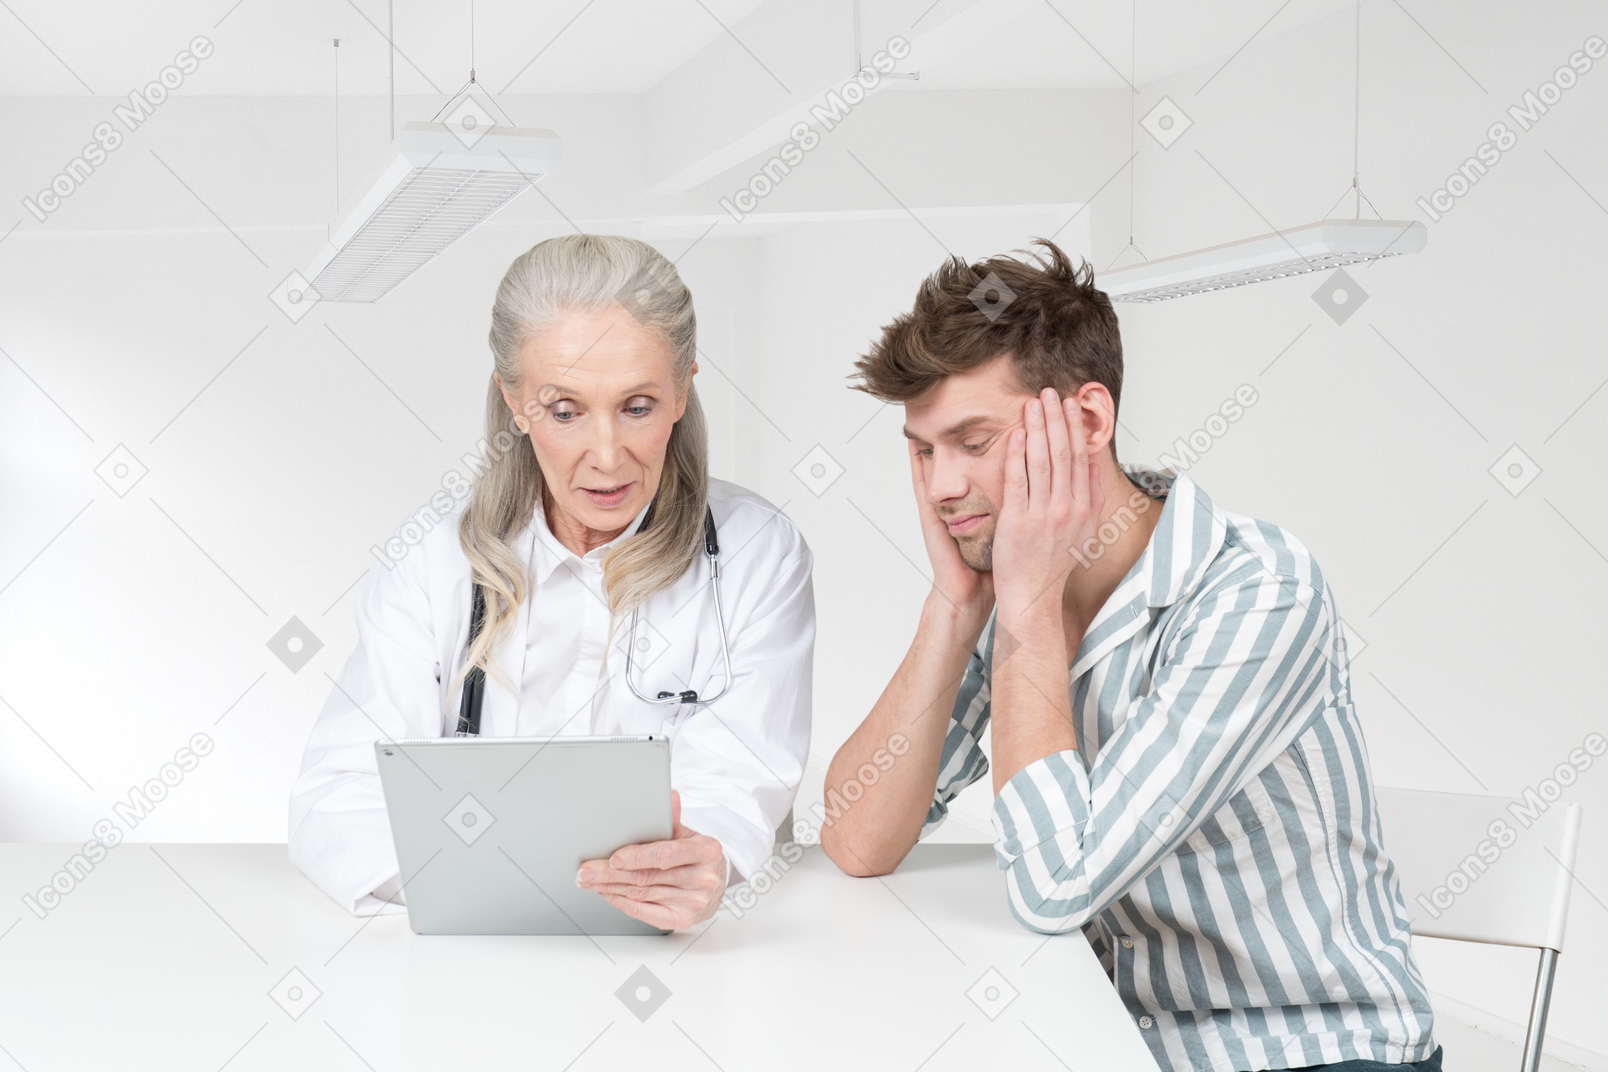 A female doctor using tablet and sitting next to a male patient